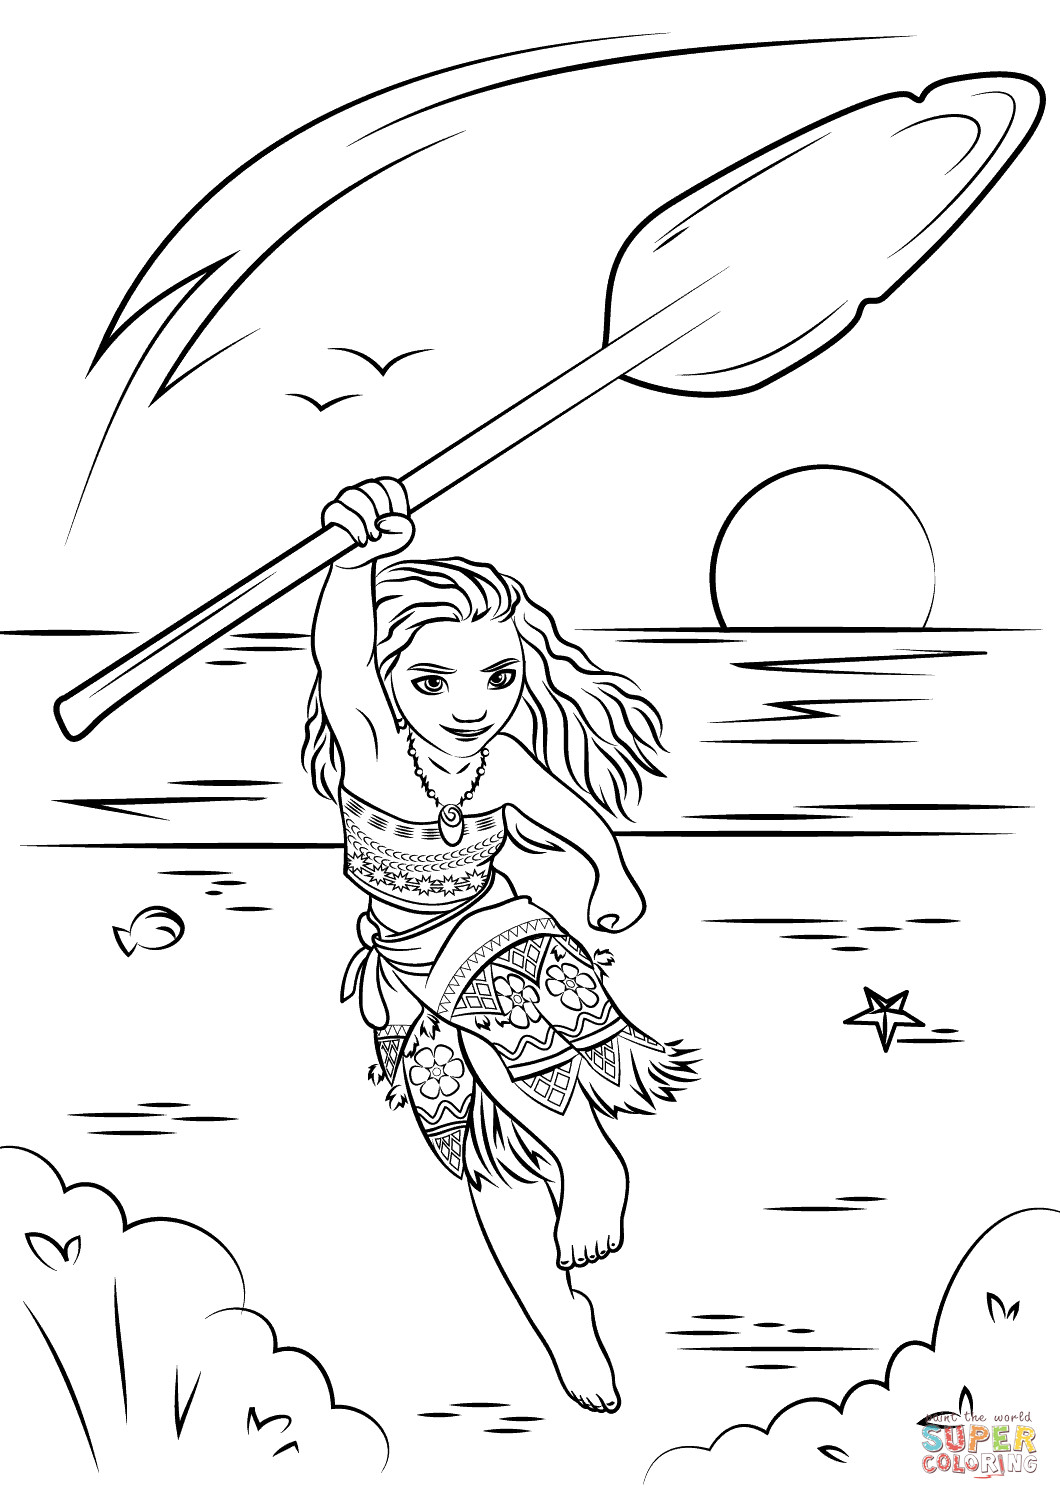 Moana Coloring Pages Printable
 Moana coloring page